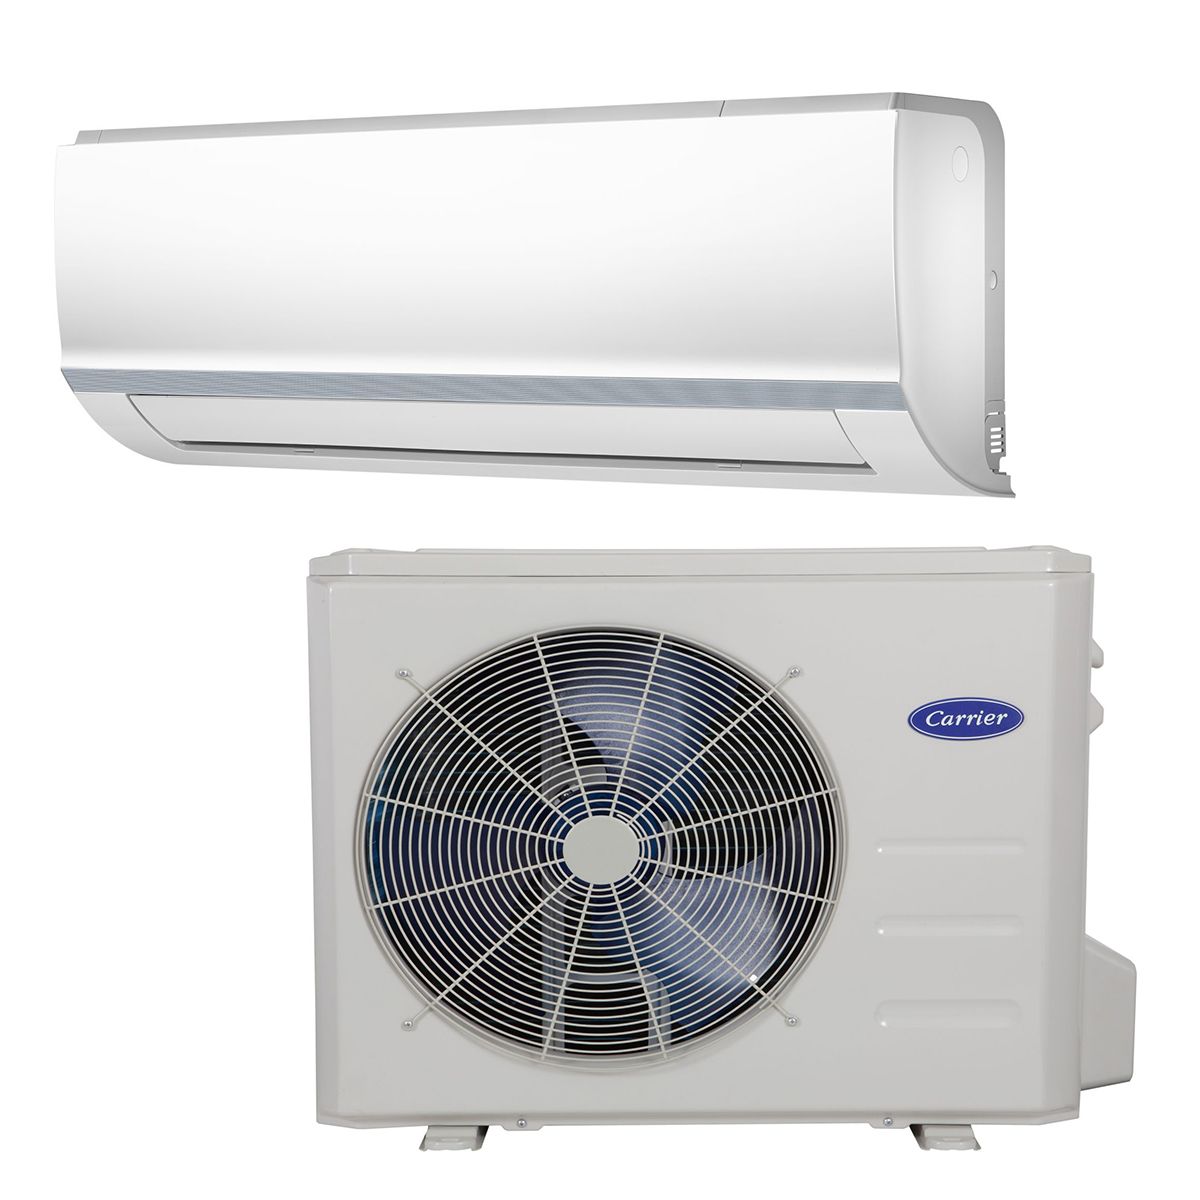 Spring 2020 Rebates Atmosphere Climate Control Specialists